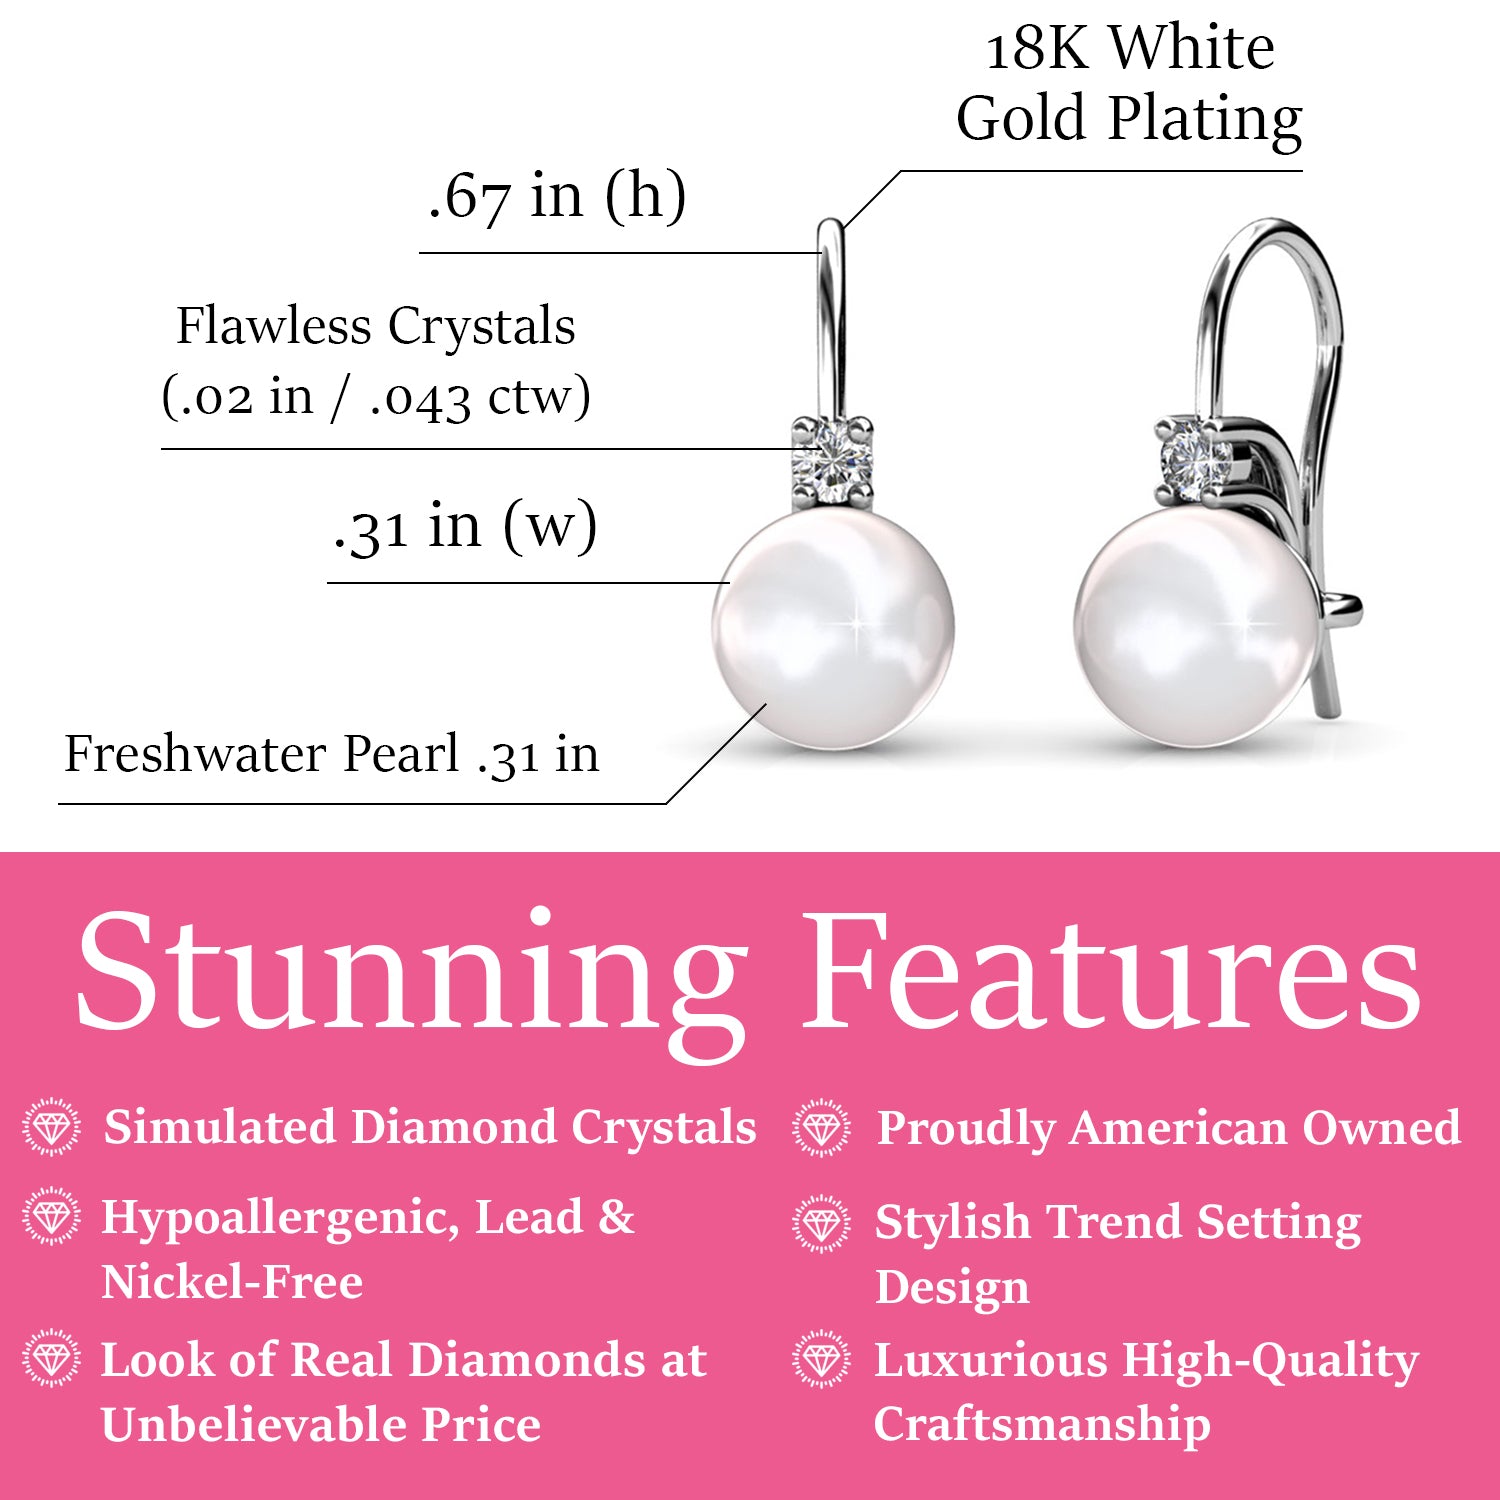 18kt white gold Trend freshwater pearl and diamond necklace